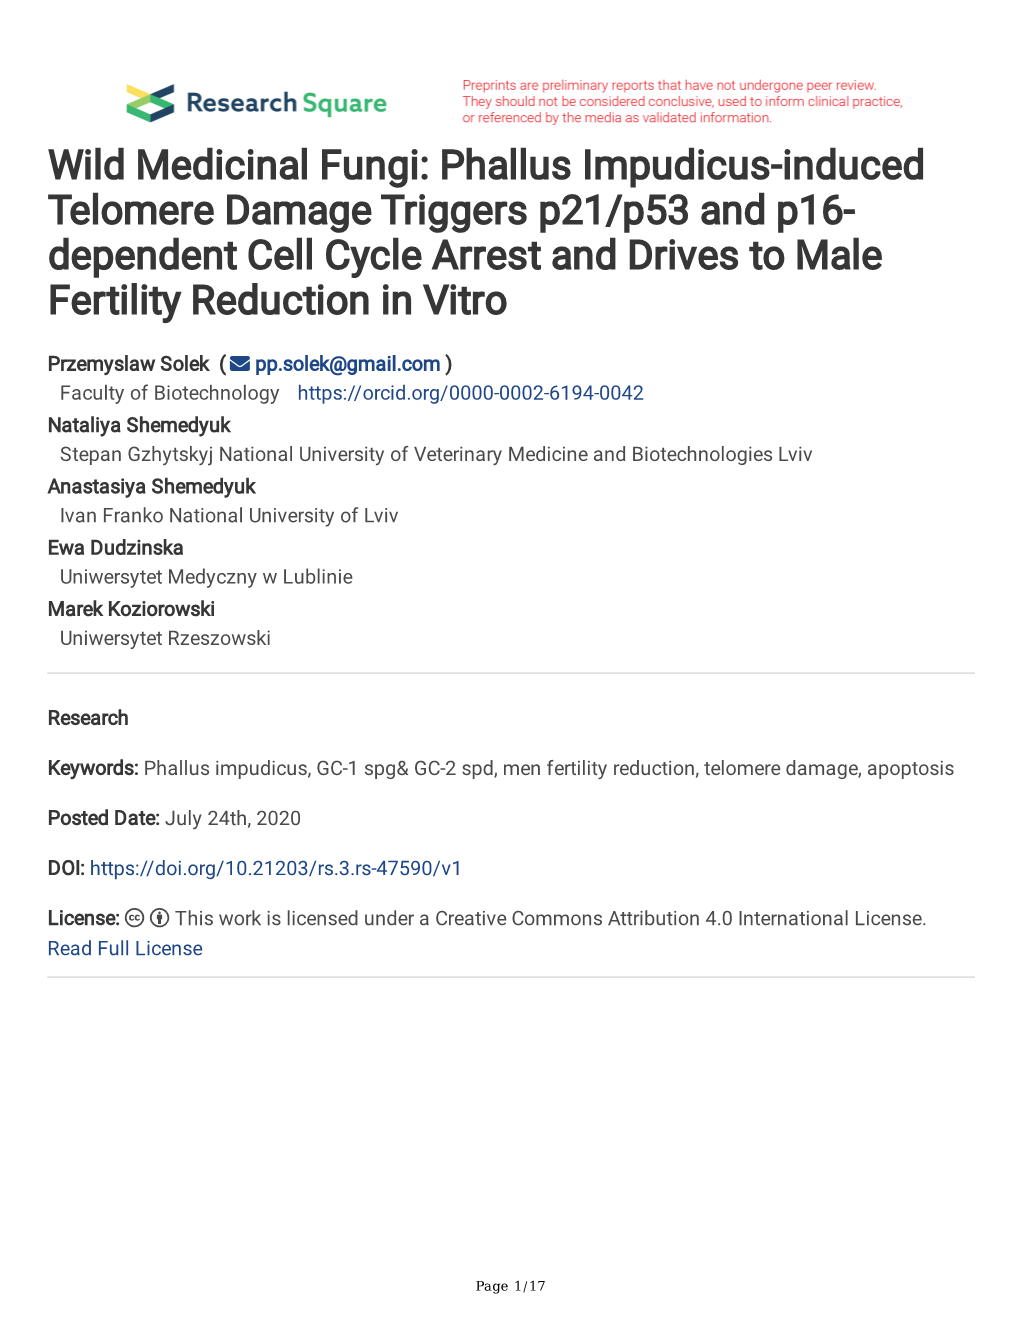 Wild Medicinal Fungi: Phallus Impudicus-Induced Telomere Damage Triggers P21/P53 and P16- Dependent Cell Cycle Arrest and Drives to Male Fertility Reduction in Vitro